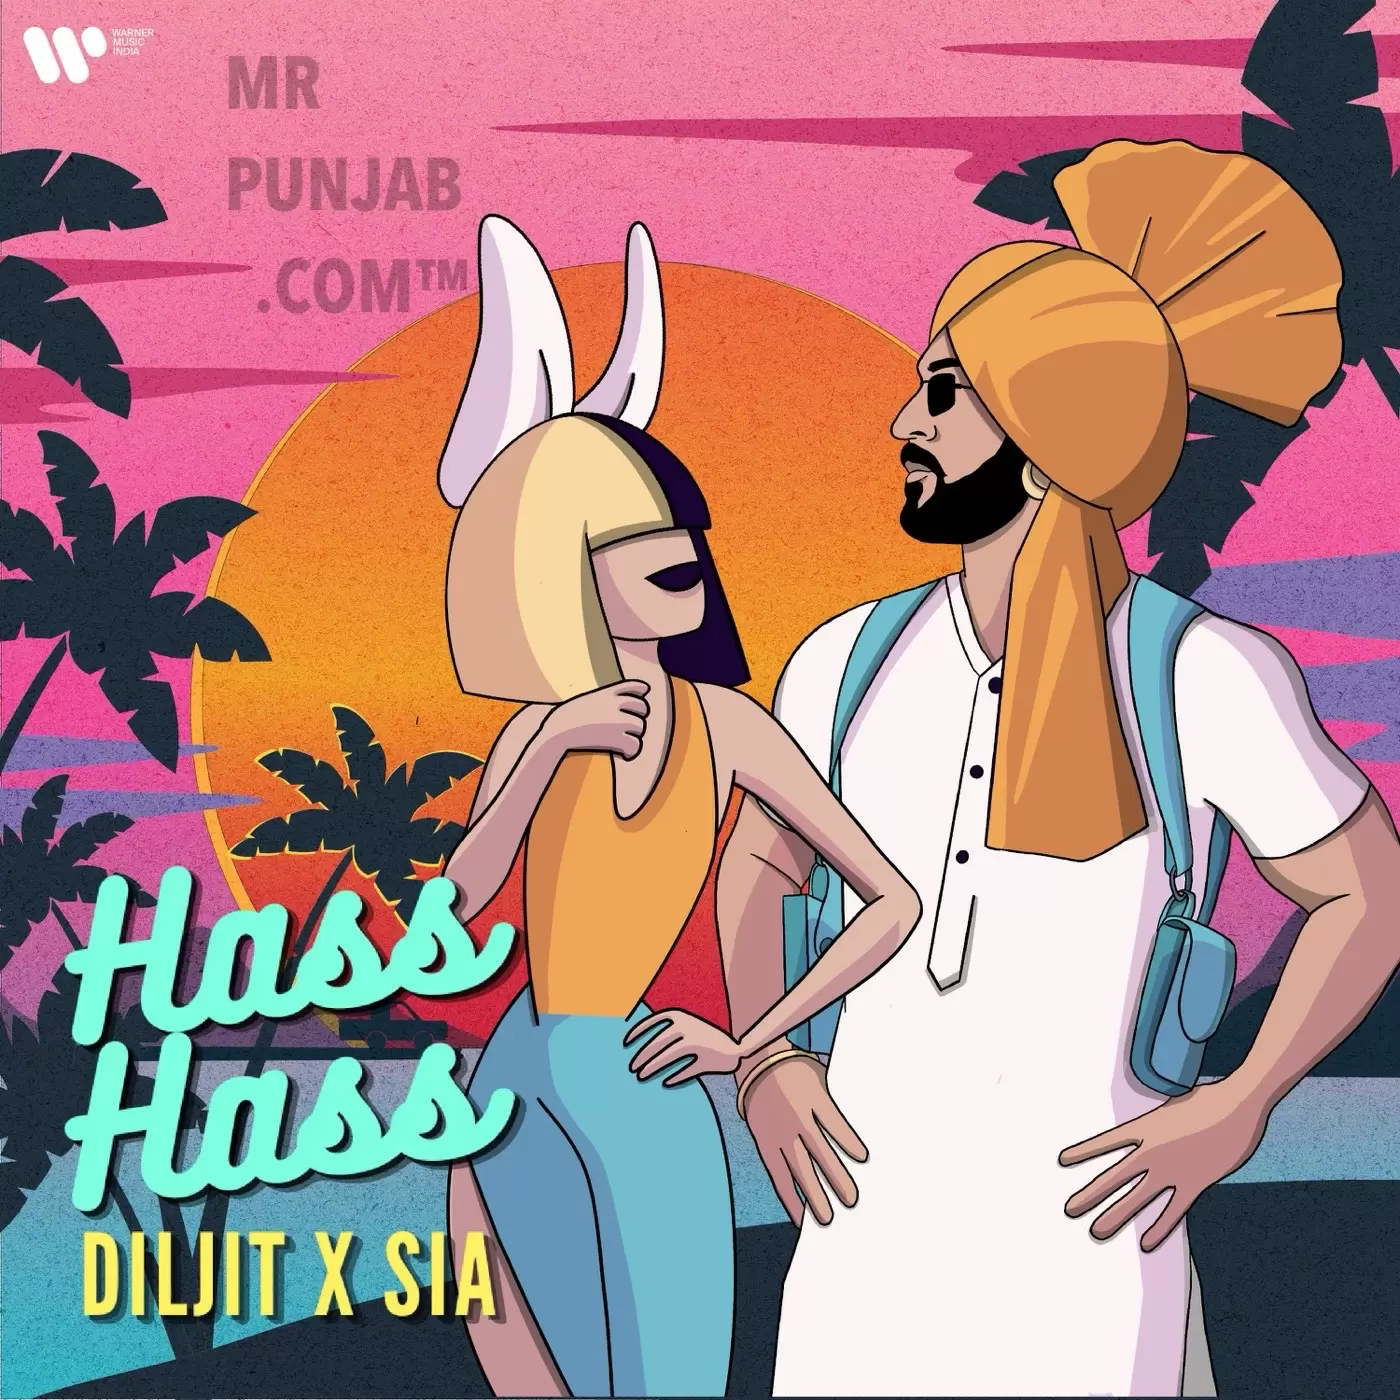 Hass Hass - Single Song by Diljit Dosanjh - Mr-Punjab